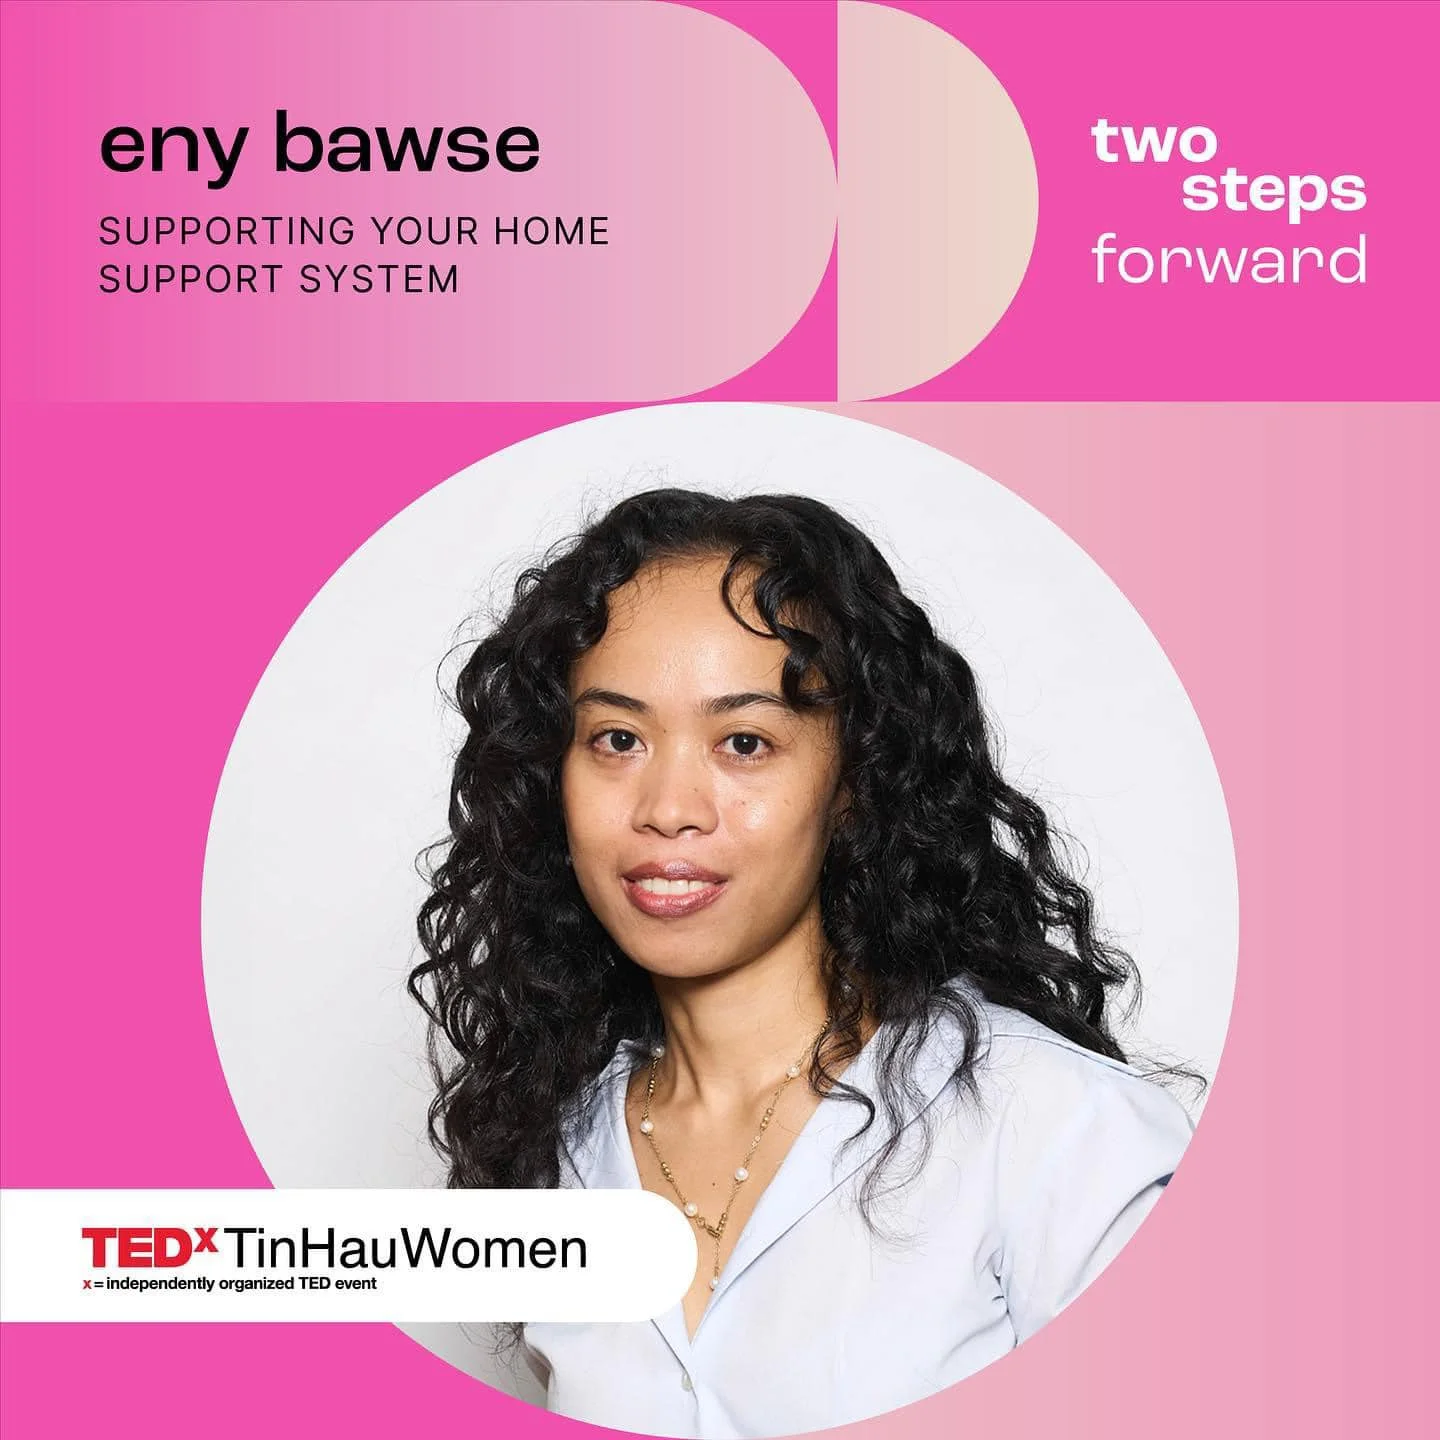 Eny於「TEDxTinHauWomen」論壇上，以「How to support the support system? 」為題分享。